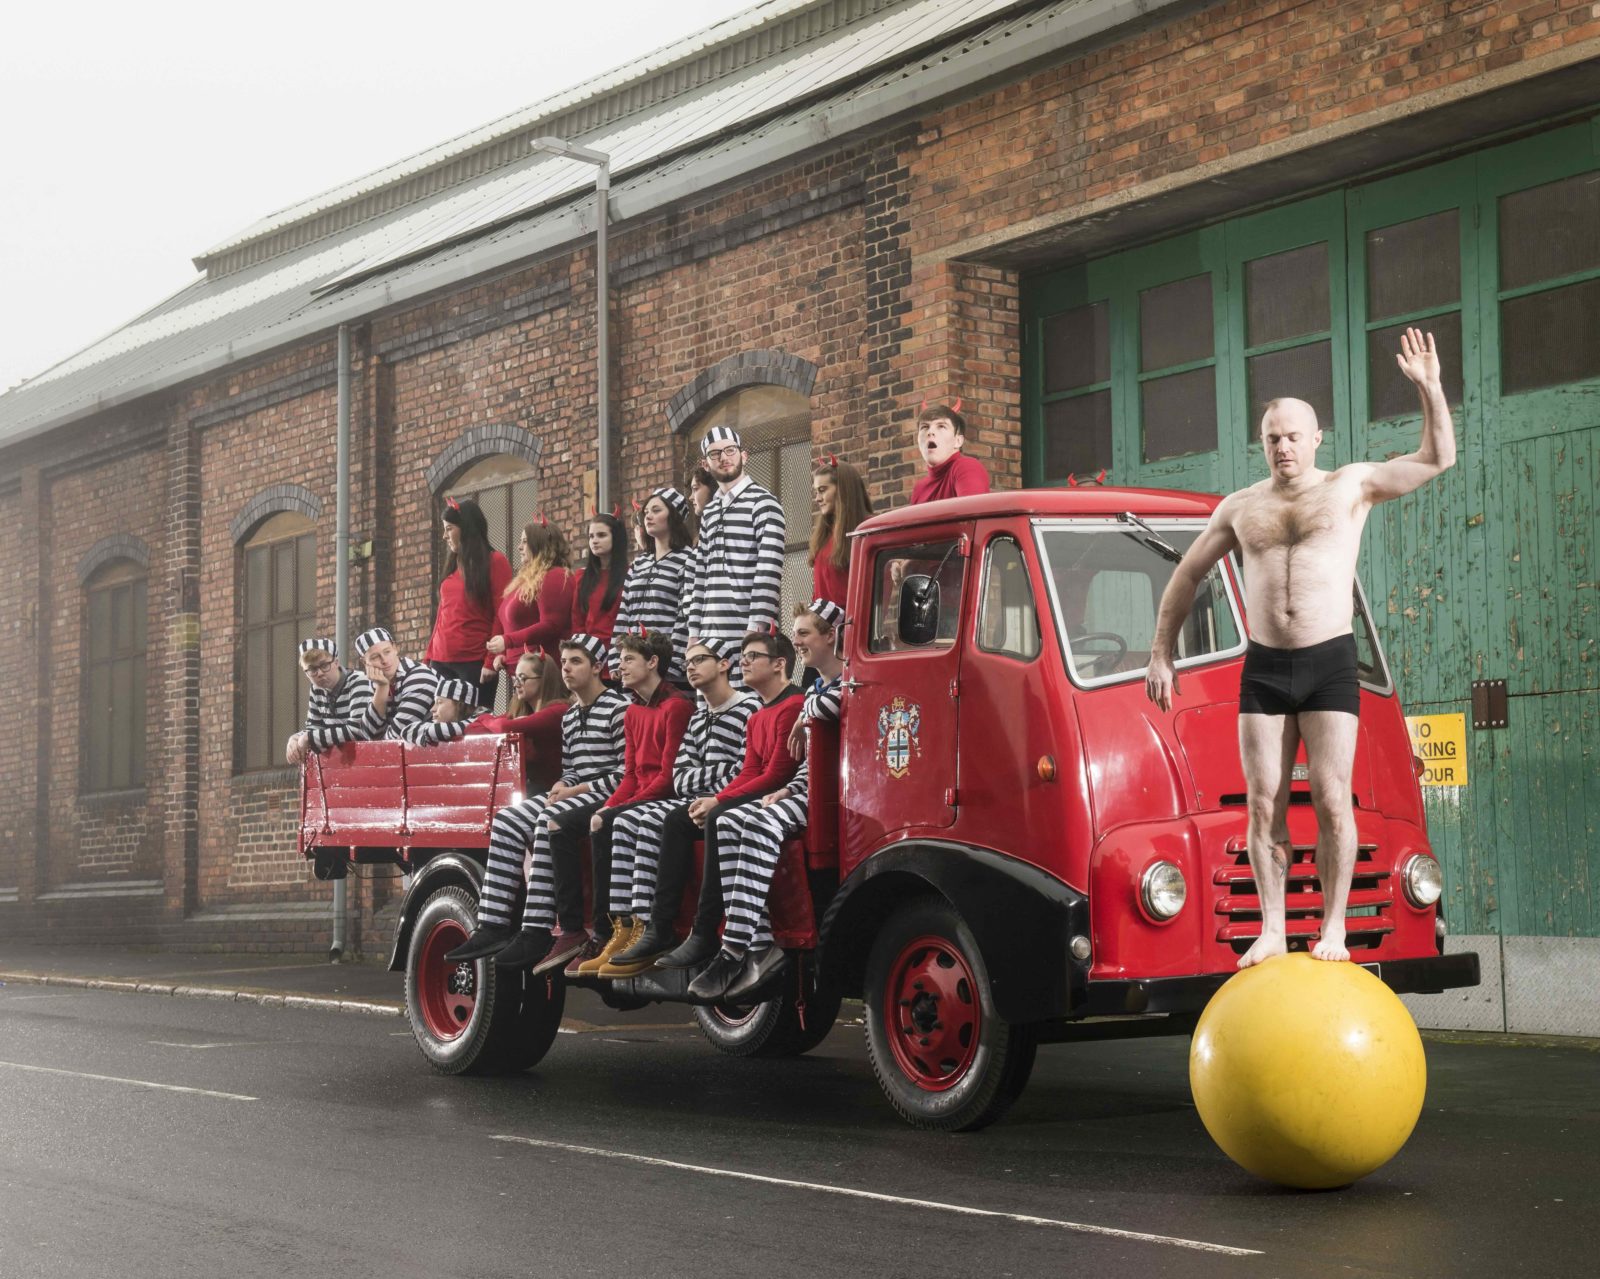 In front of a large green garage door and red brick wall a bright red, classic flat bed truck stands in the road. On the back of the truck sit and stand a group of people. Some wear striped outfits and some wear red outfits with fake horns. At the front of the truck and man balances on a large yellow ball wearing only black shorts.